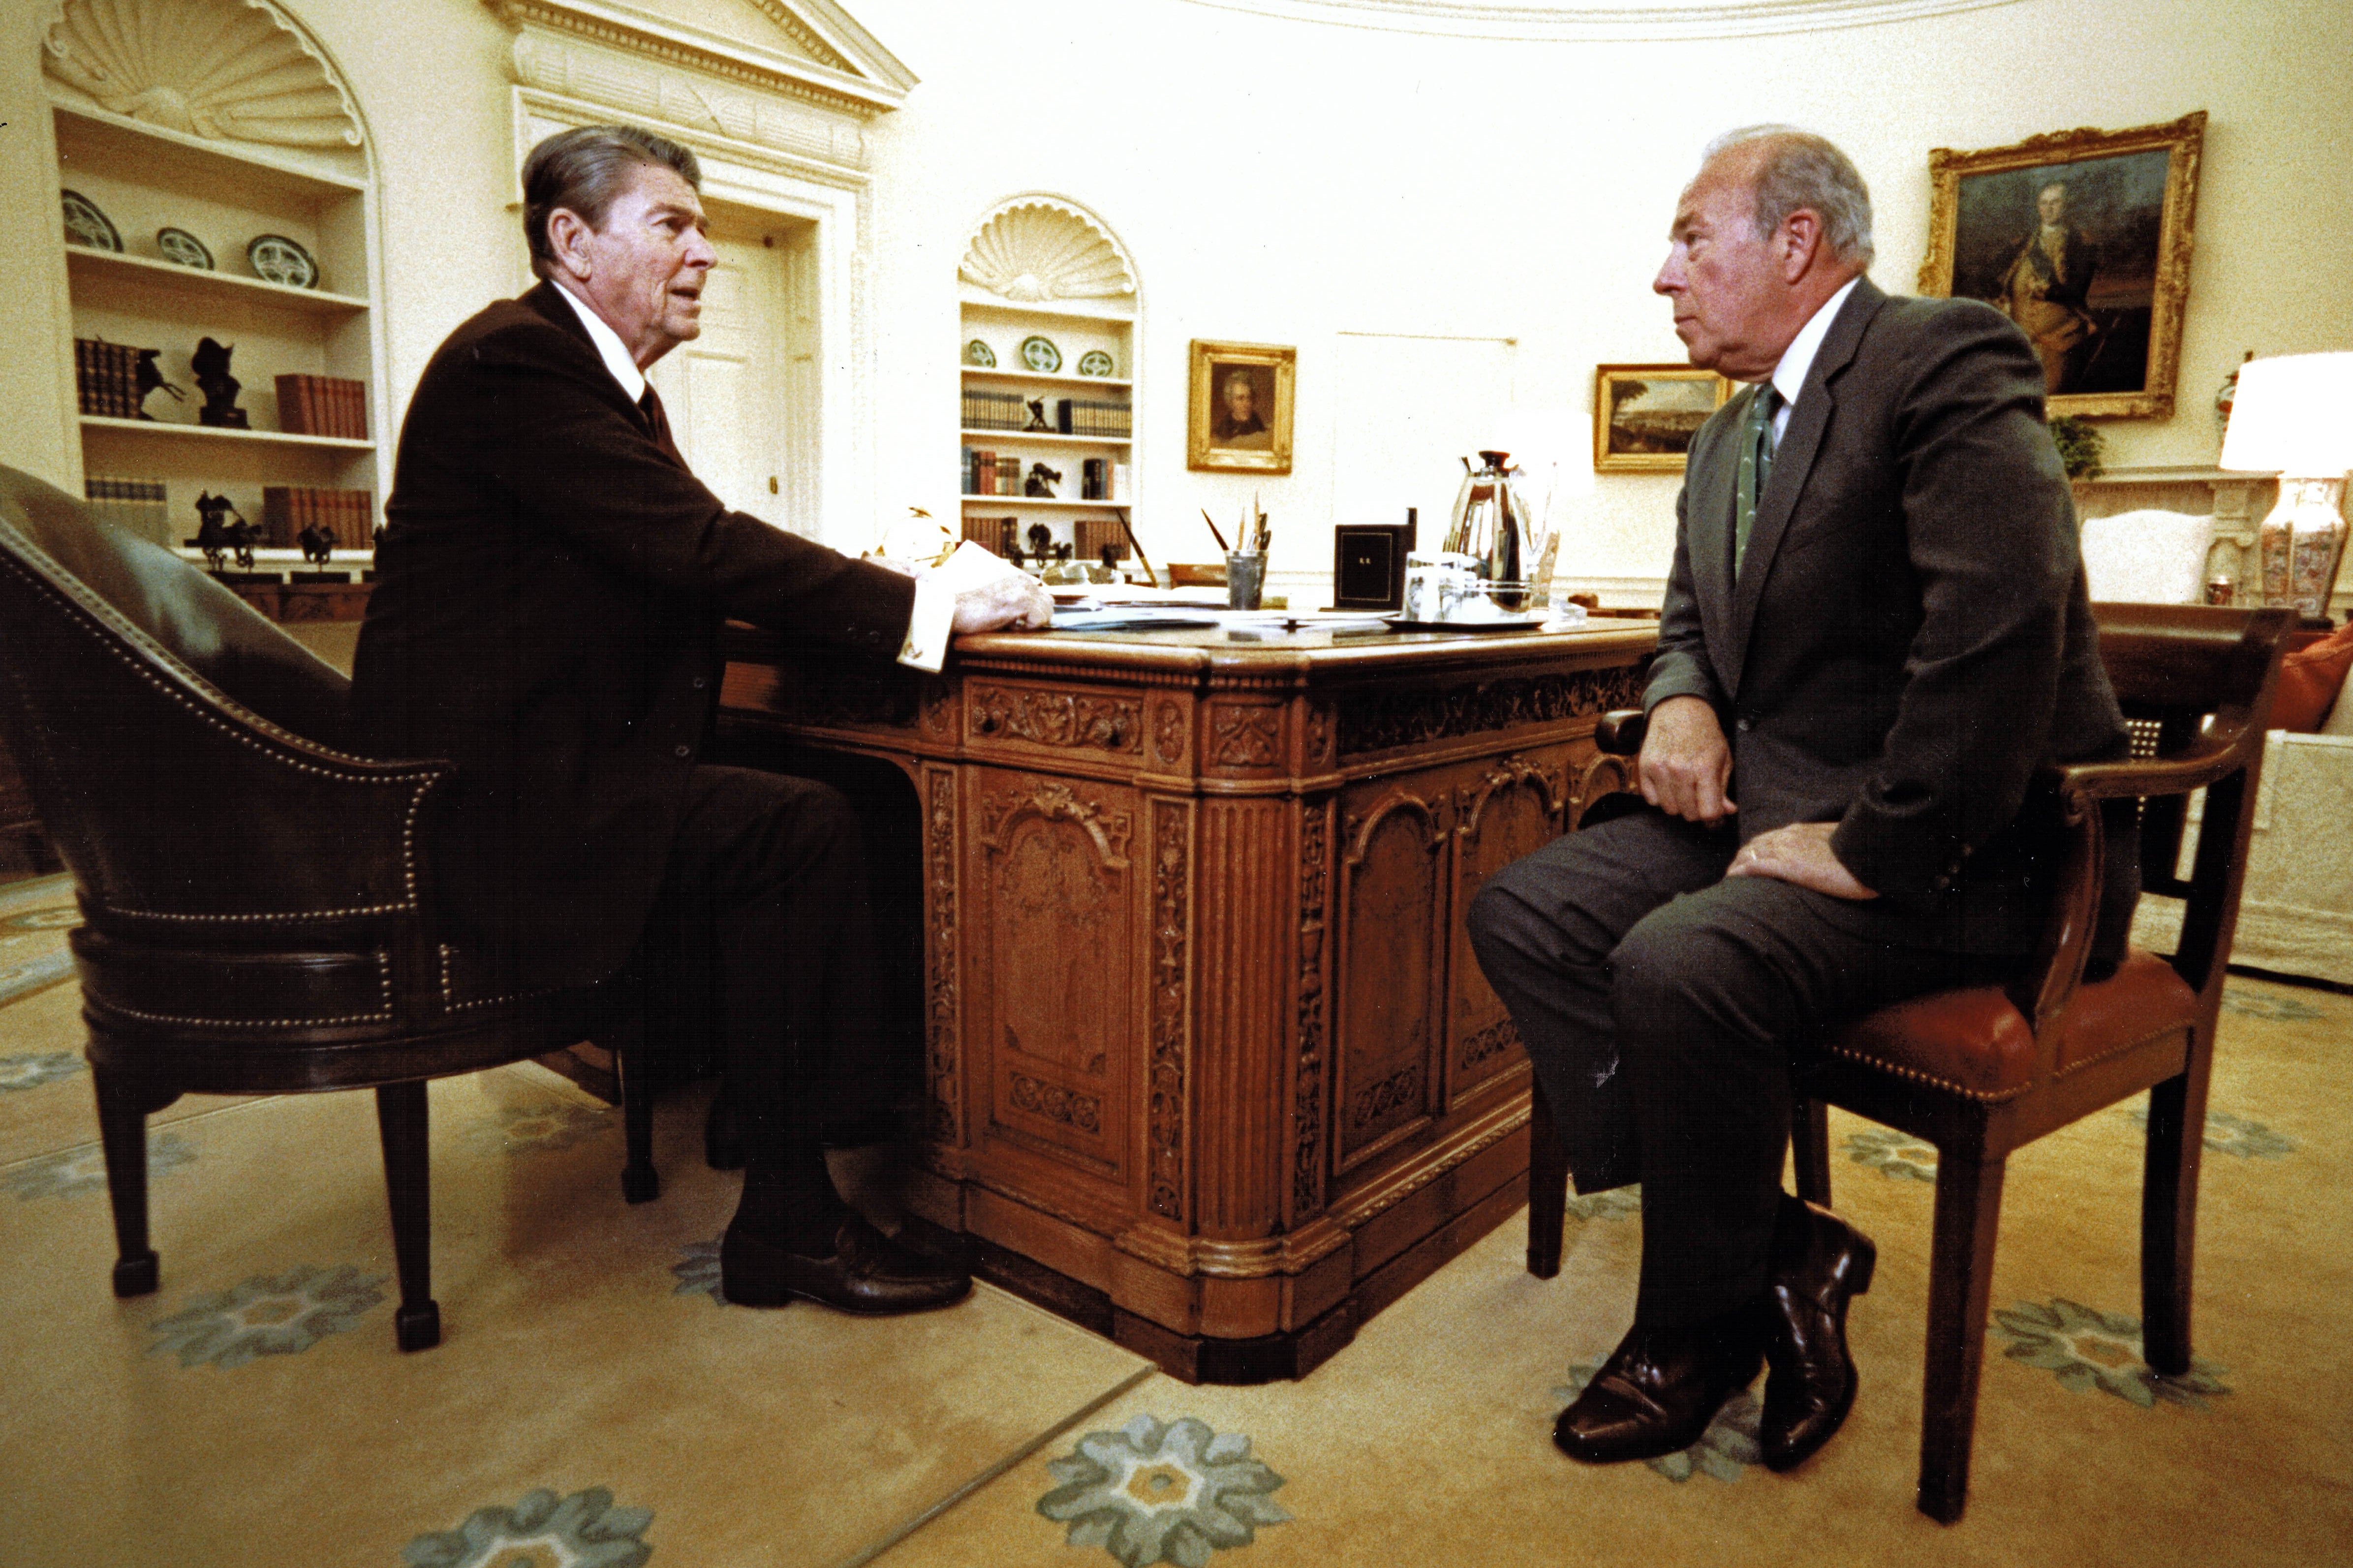 With Ronald Reagan in the Oval Office in 1985